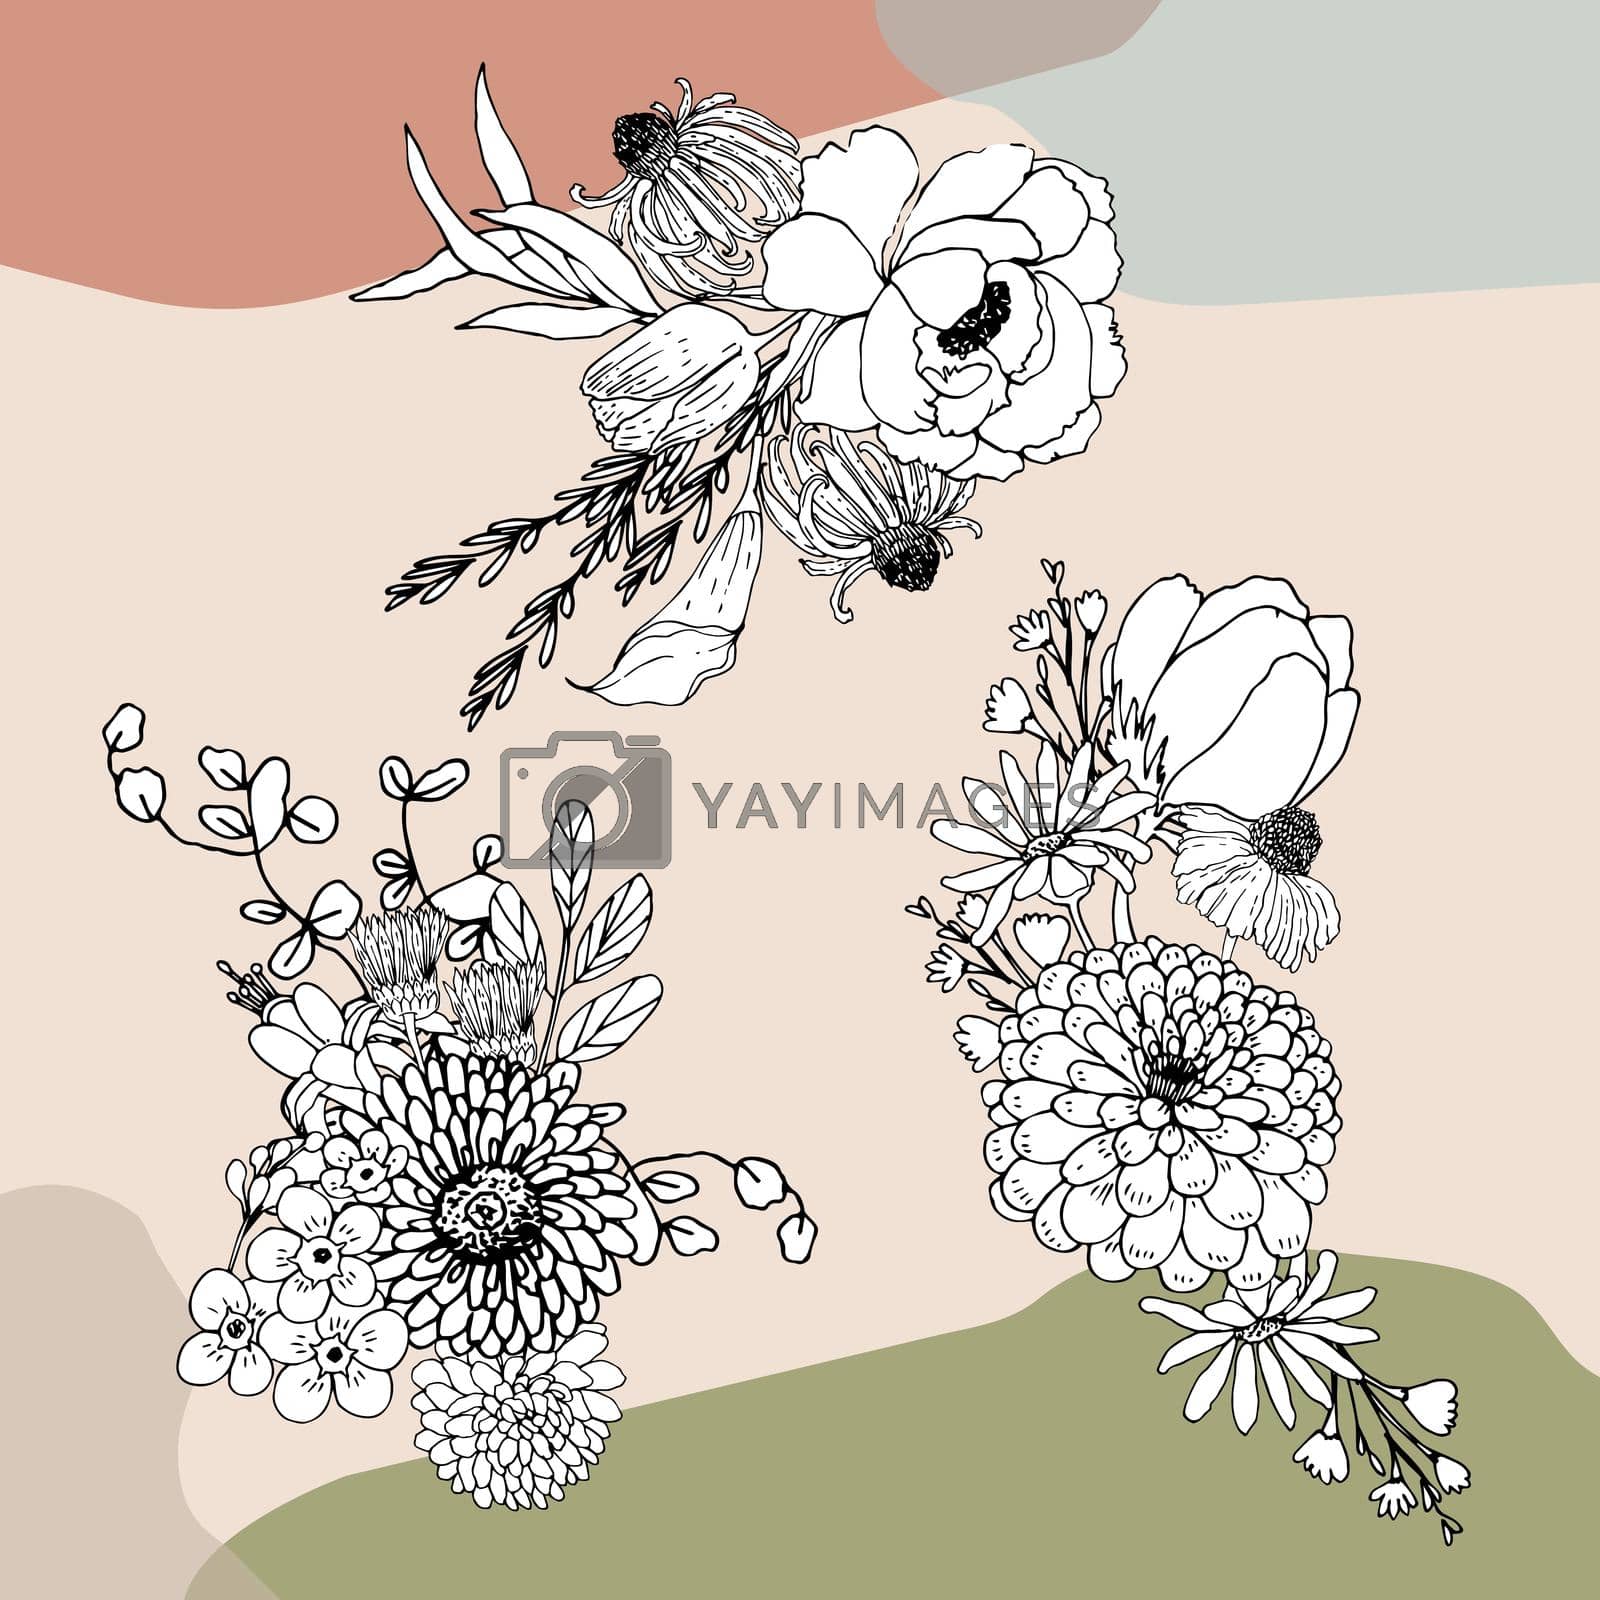 Royalty free image of Bouquet flowers line art tropial.Decorative flowering plants. by Photographeeasia